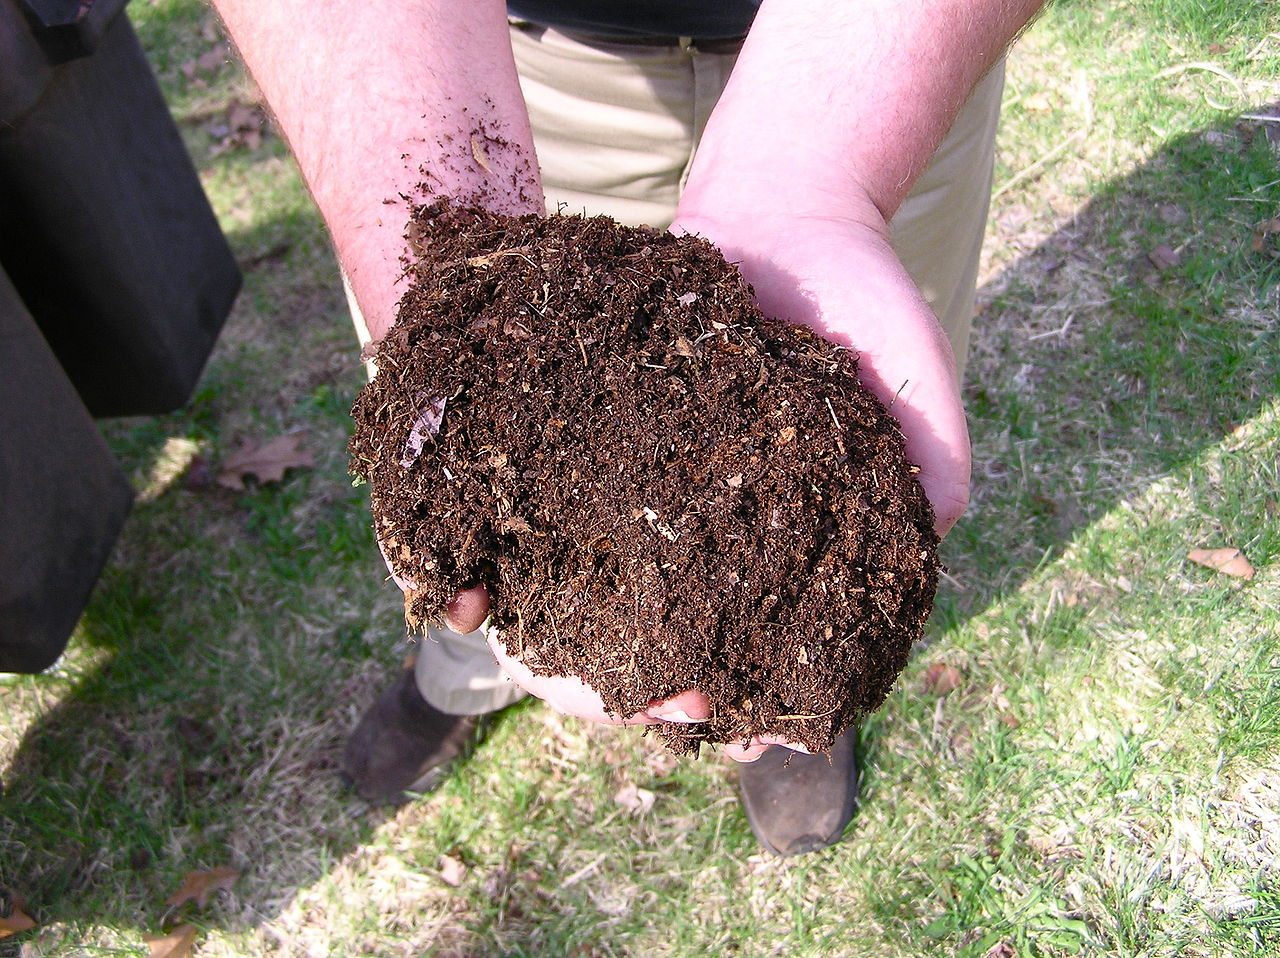 Food for Compost event slated for Friday at Foothills Landfill